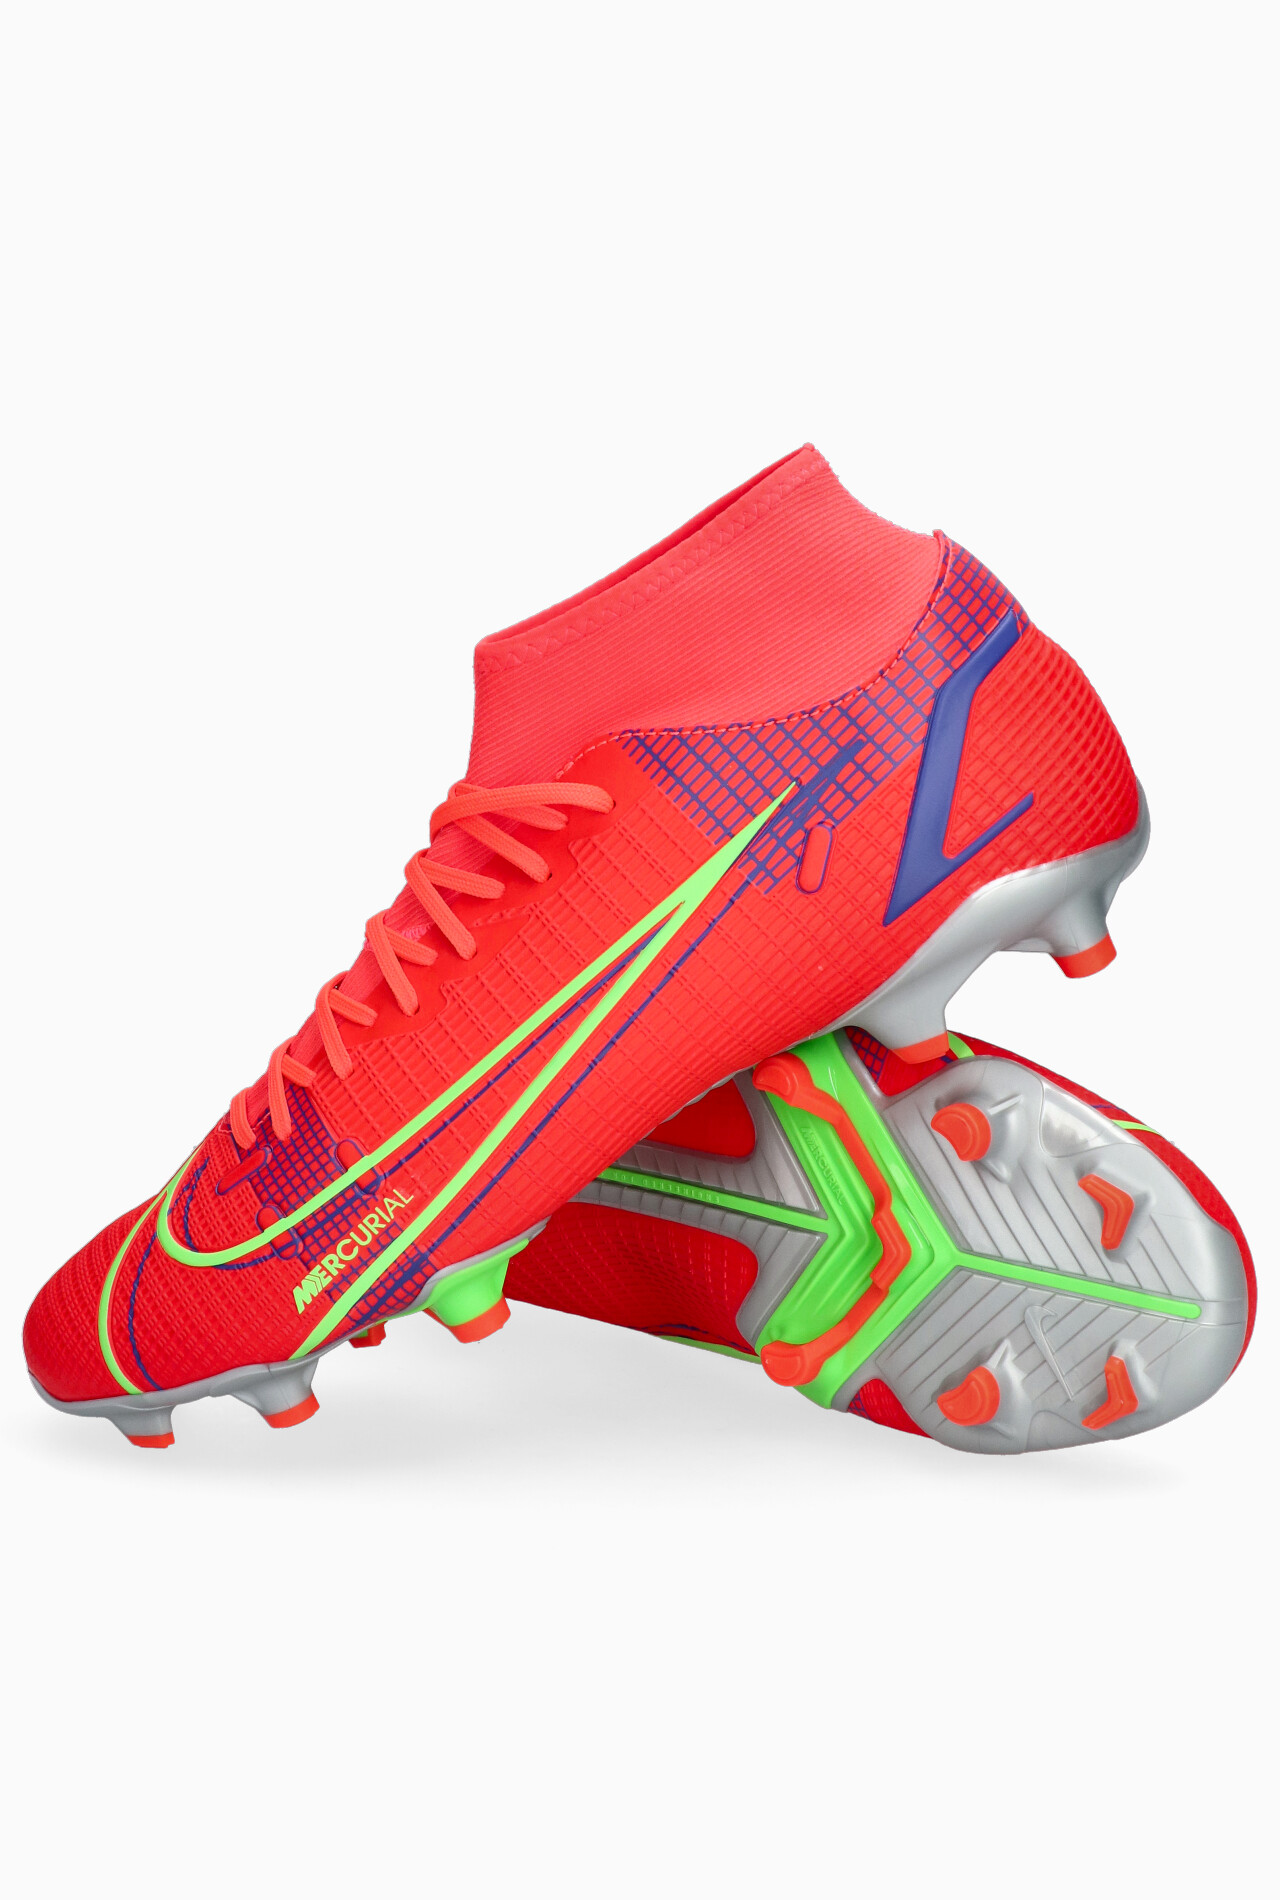 new mercurial superfly